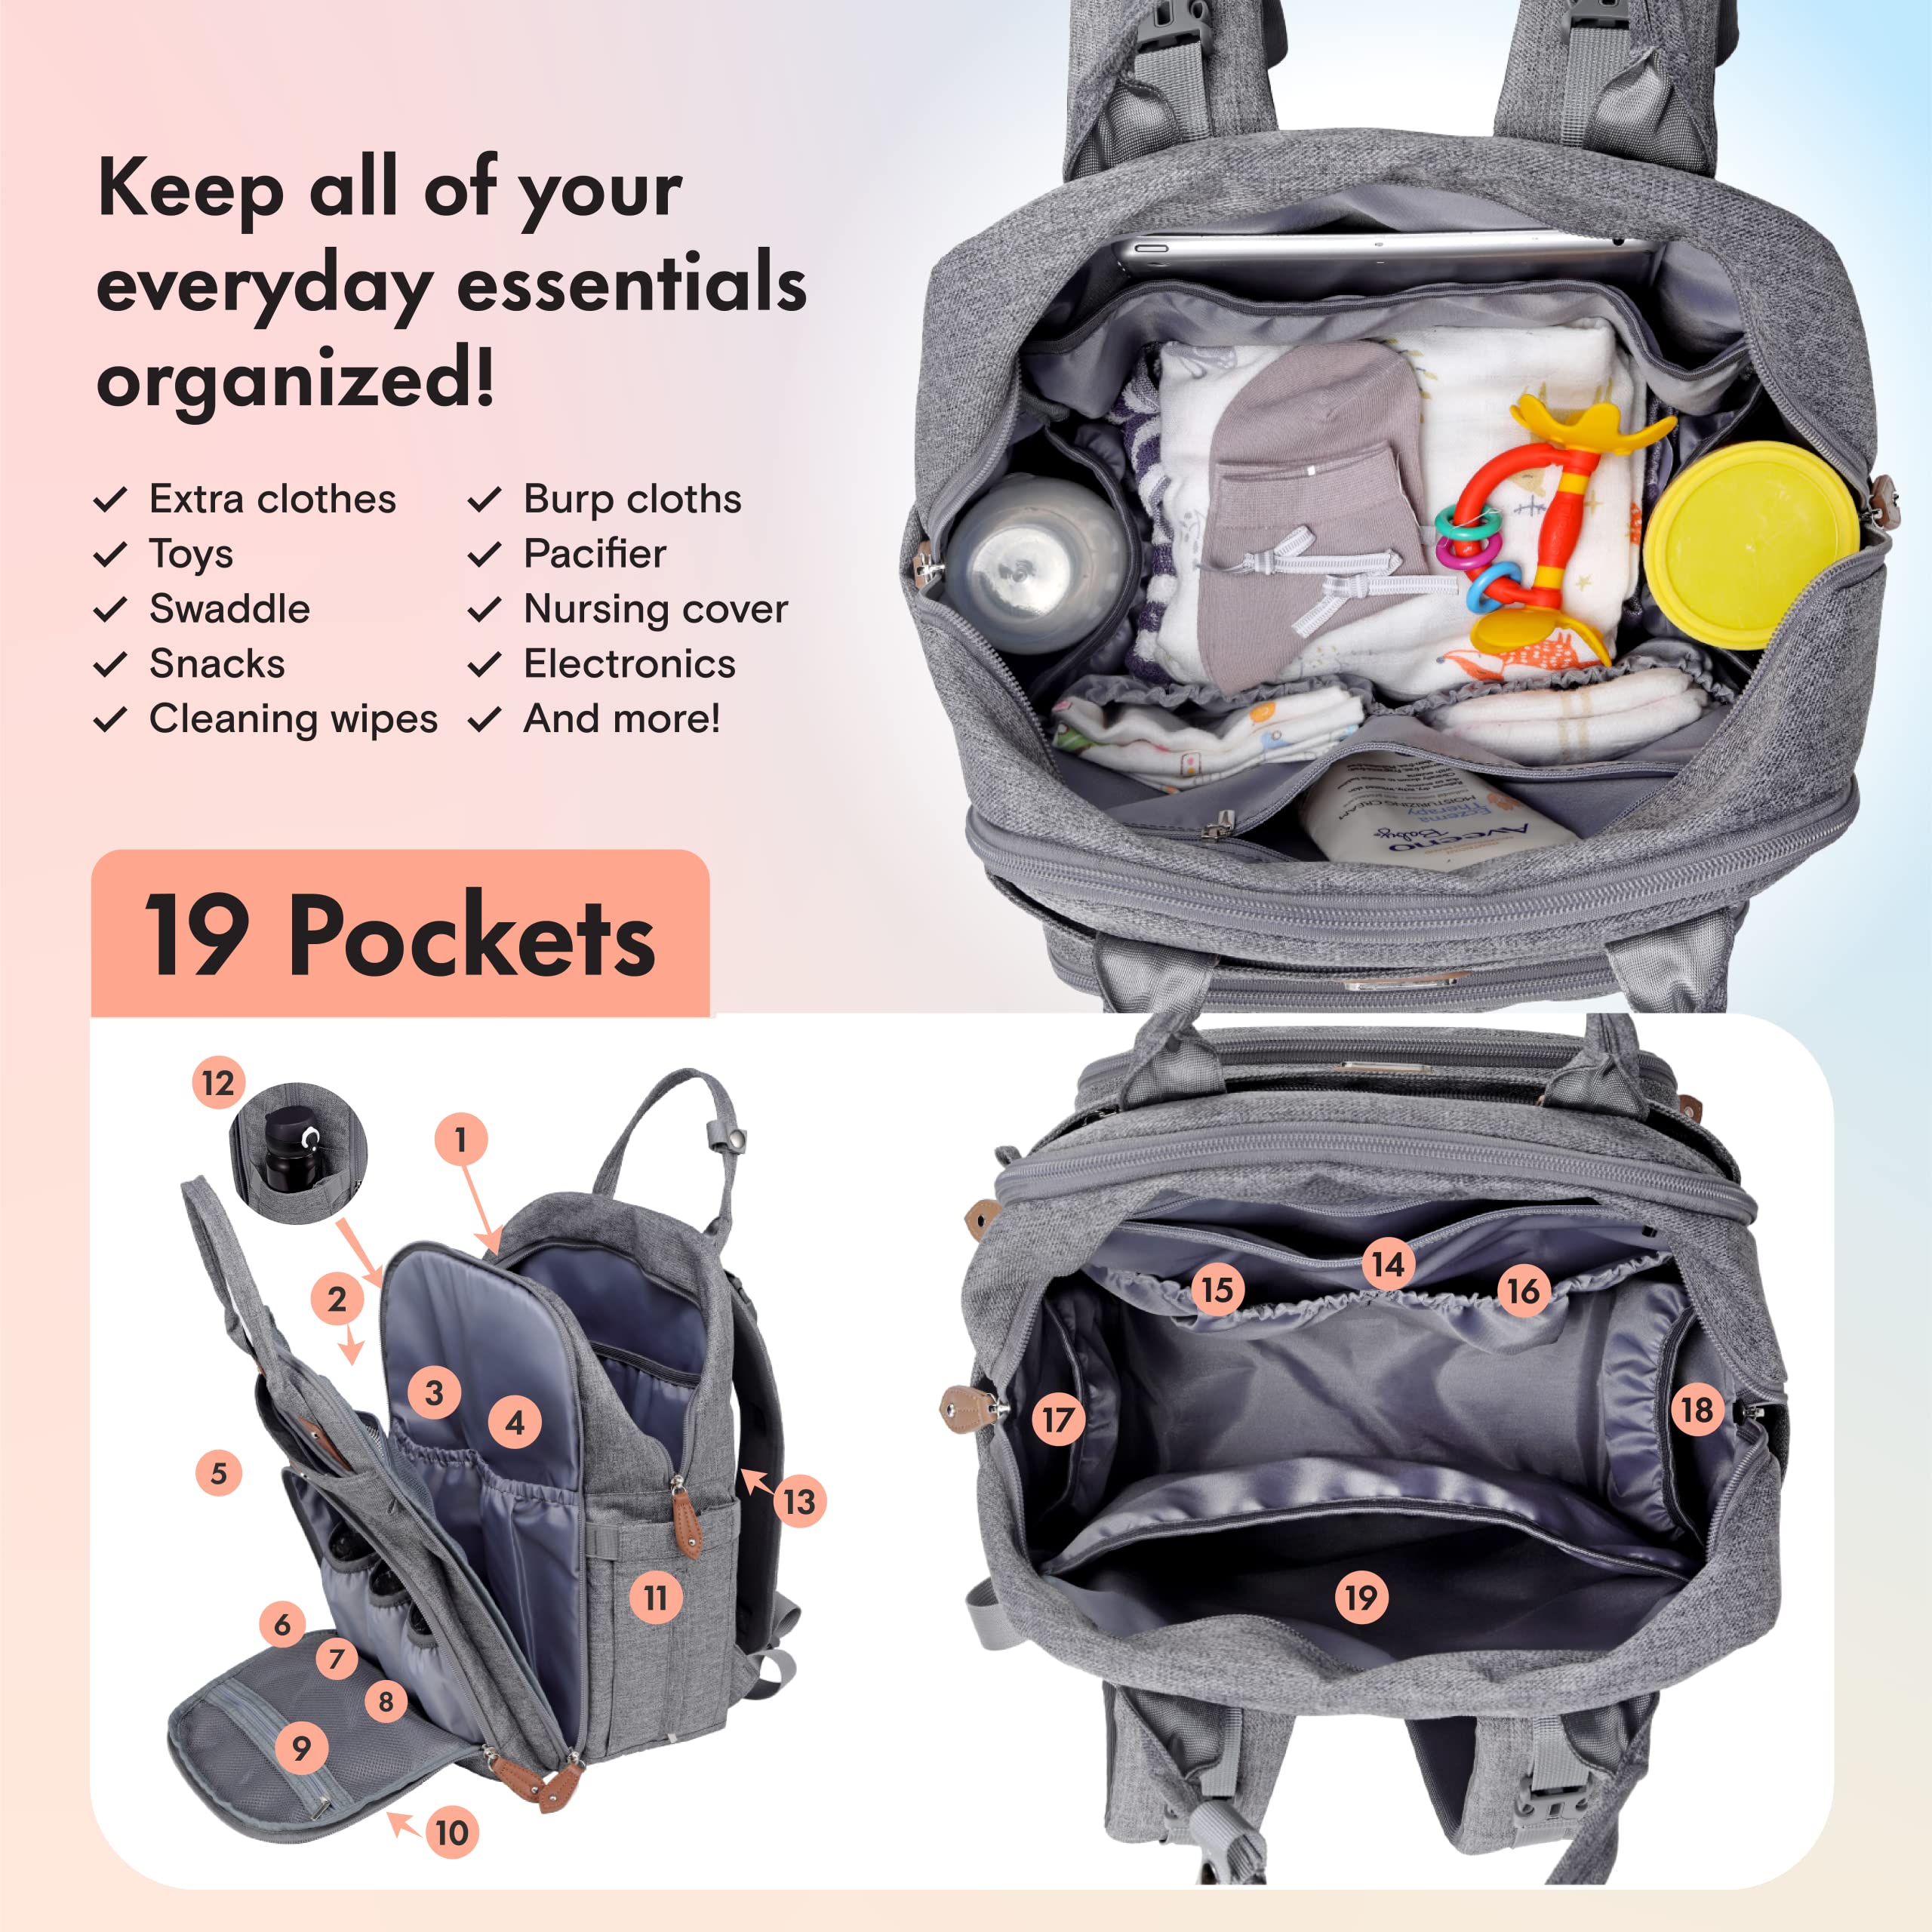 Dikaslon Diaper Bag Backpack with Portable Changing Pad, Pacifier Case and Stroller Straps, Large Unisex Baby Bags for Boys Girls, Multipurpose Travel Back Pack for Moms Dads, Gray